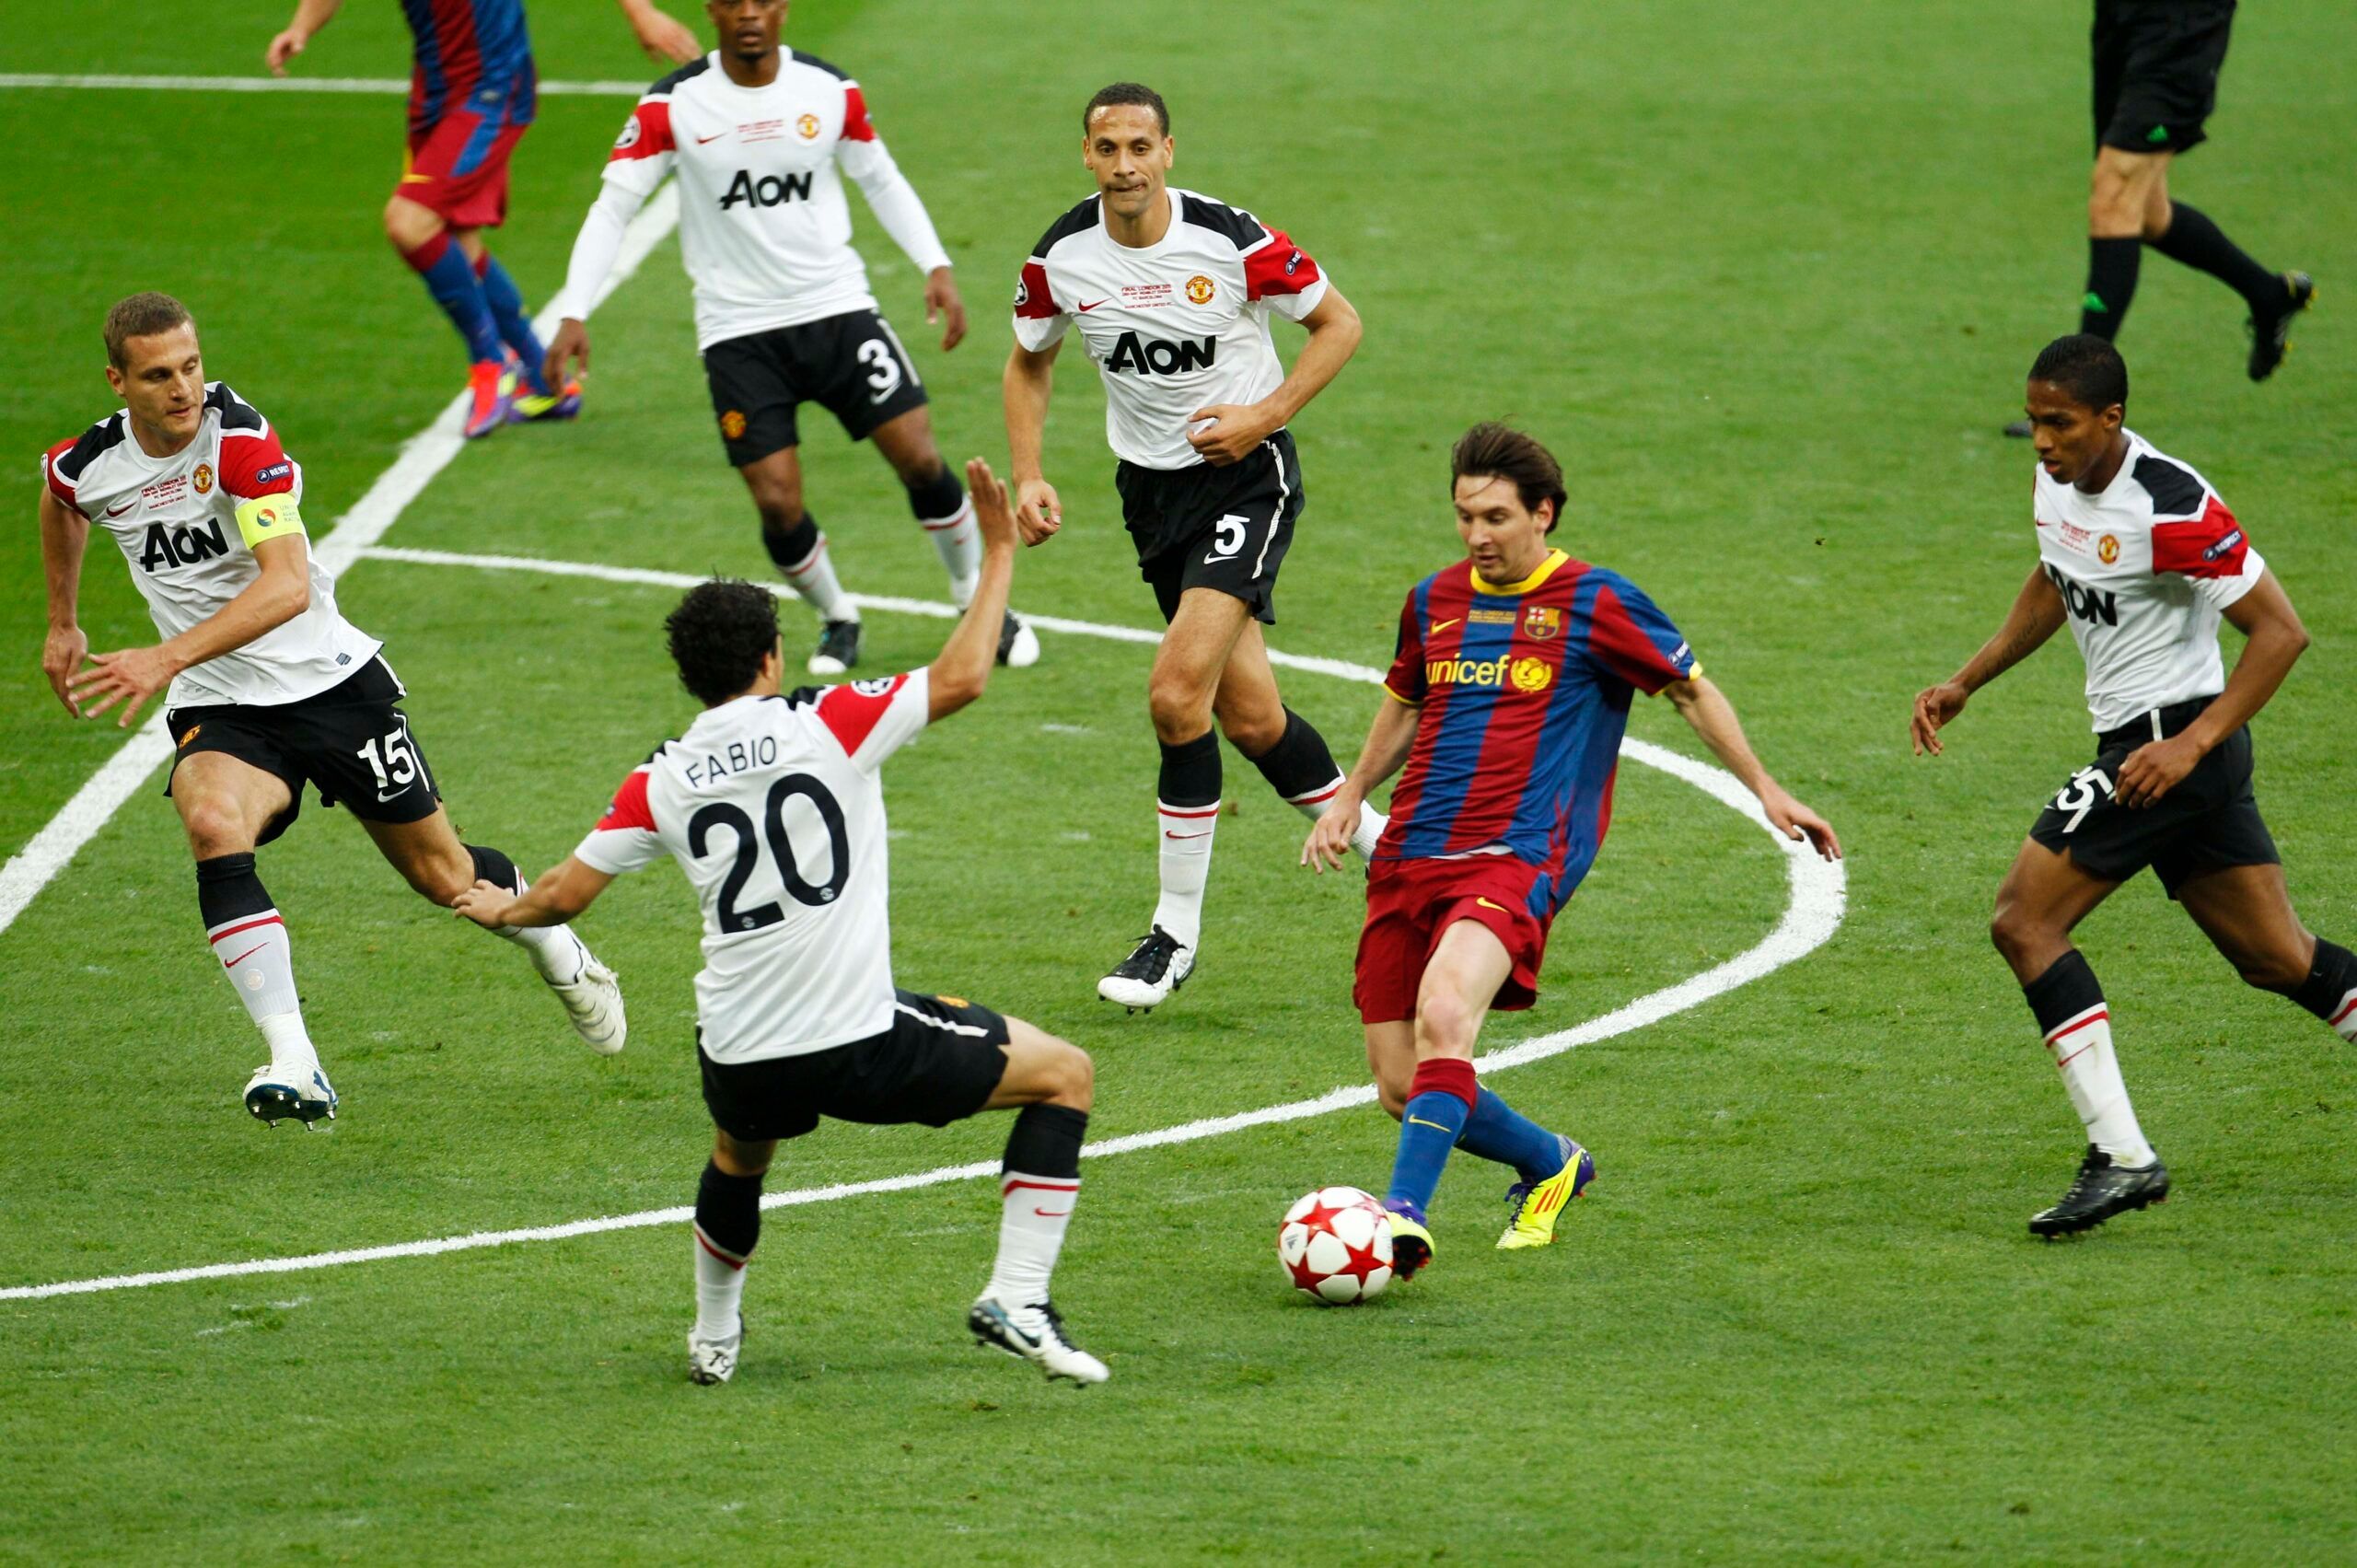 Man United legend Rio Ferdinand recalls an embarrassment at the hands of Sergio Busquets in the 2011 UCL final.